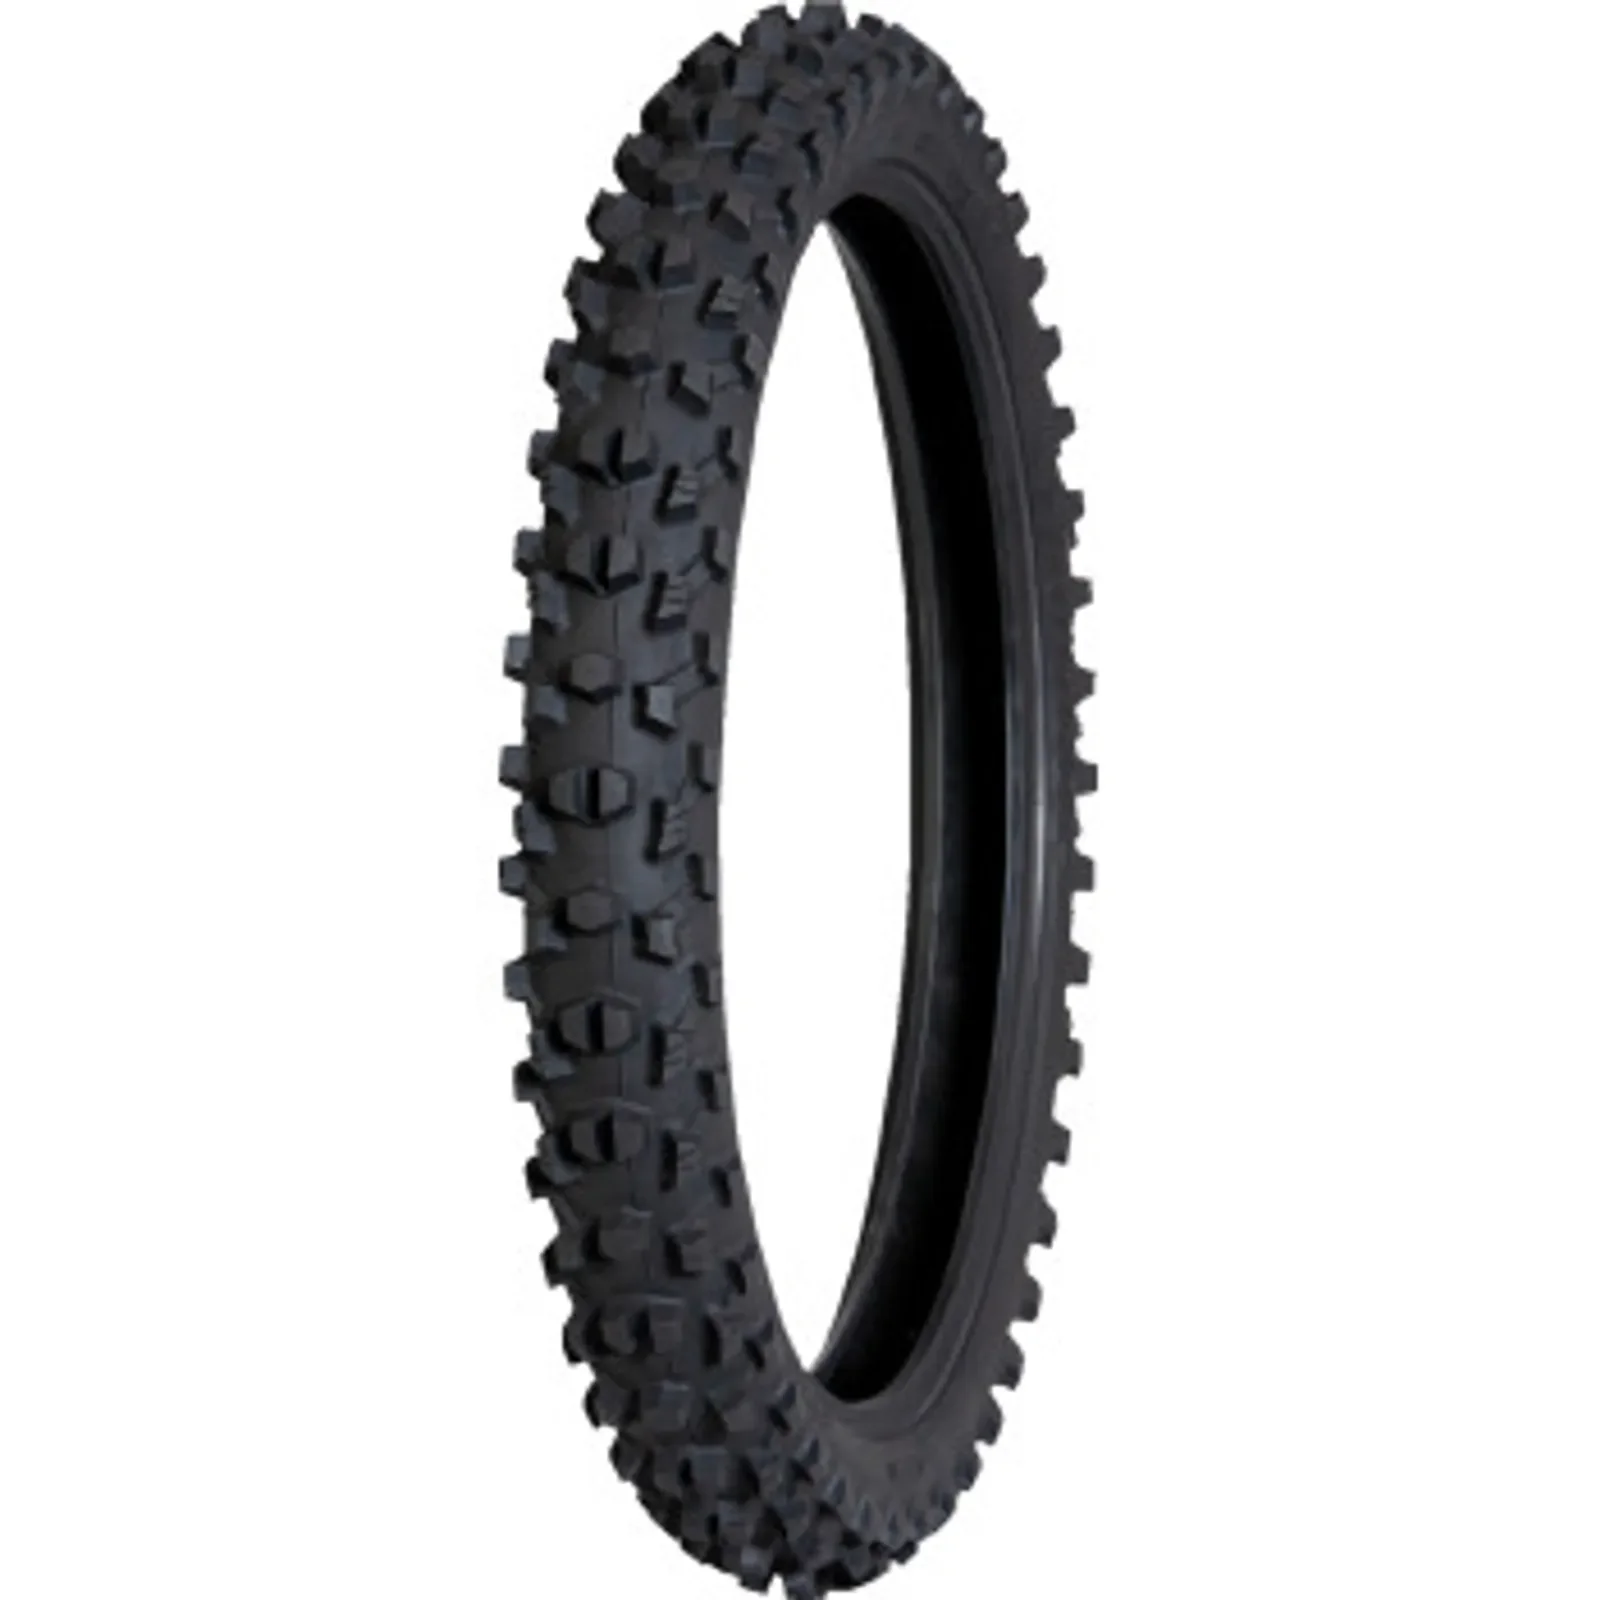 Dunlop Geomax MX34 Front Tire 80/100-21 51M (0312-0514)